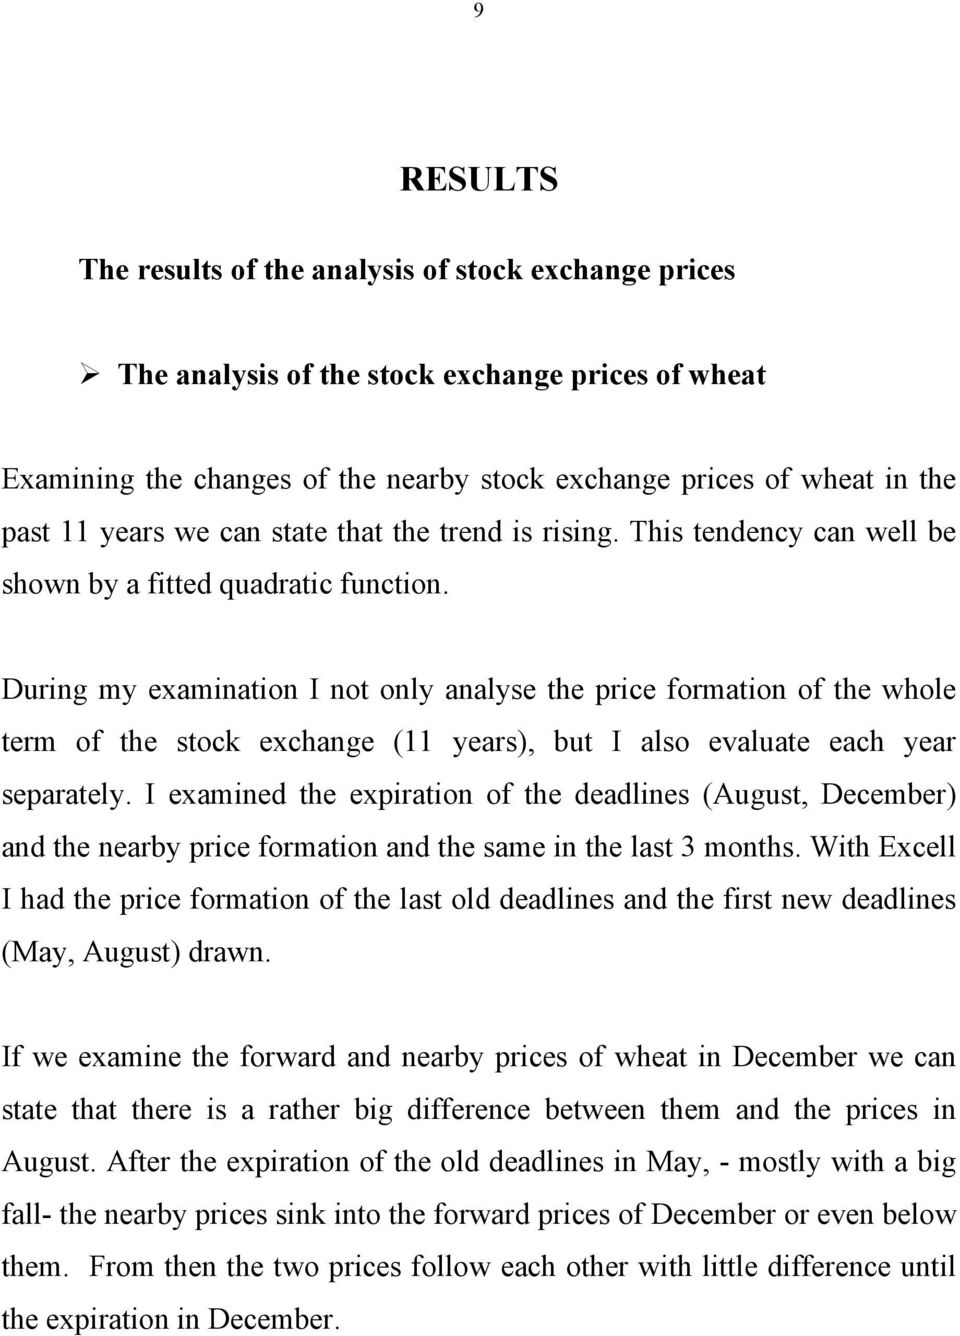 During my examination I not only analyse the price formation of the whole term of the stock exchange (11 years), but I also evaluate each year separately.